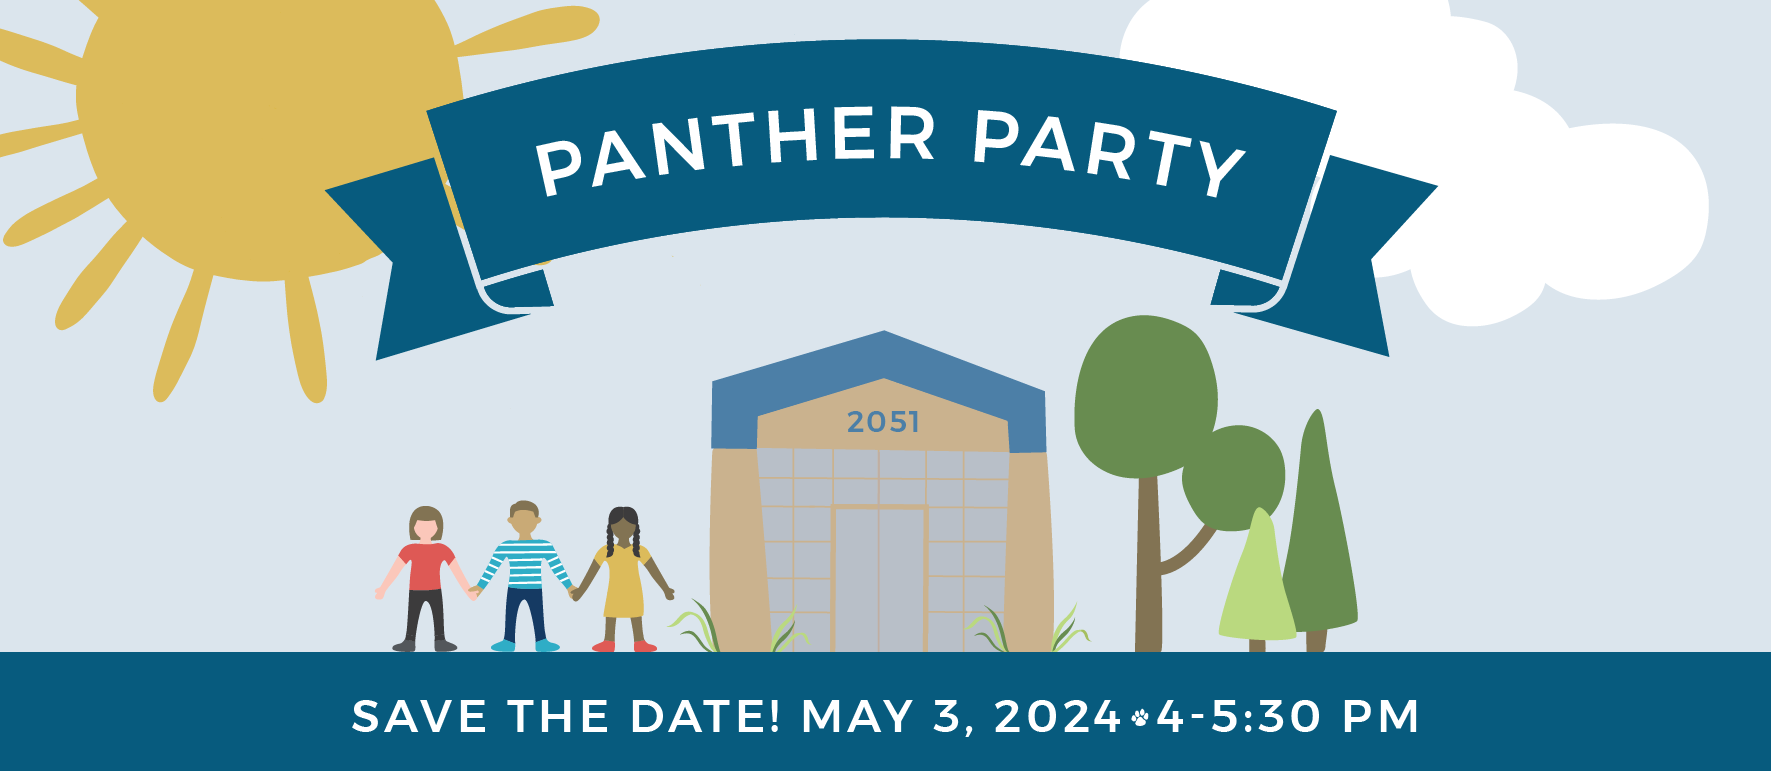 Panther Party